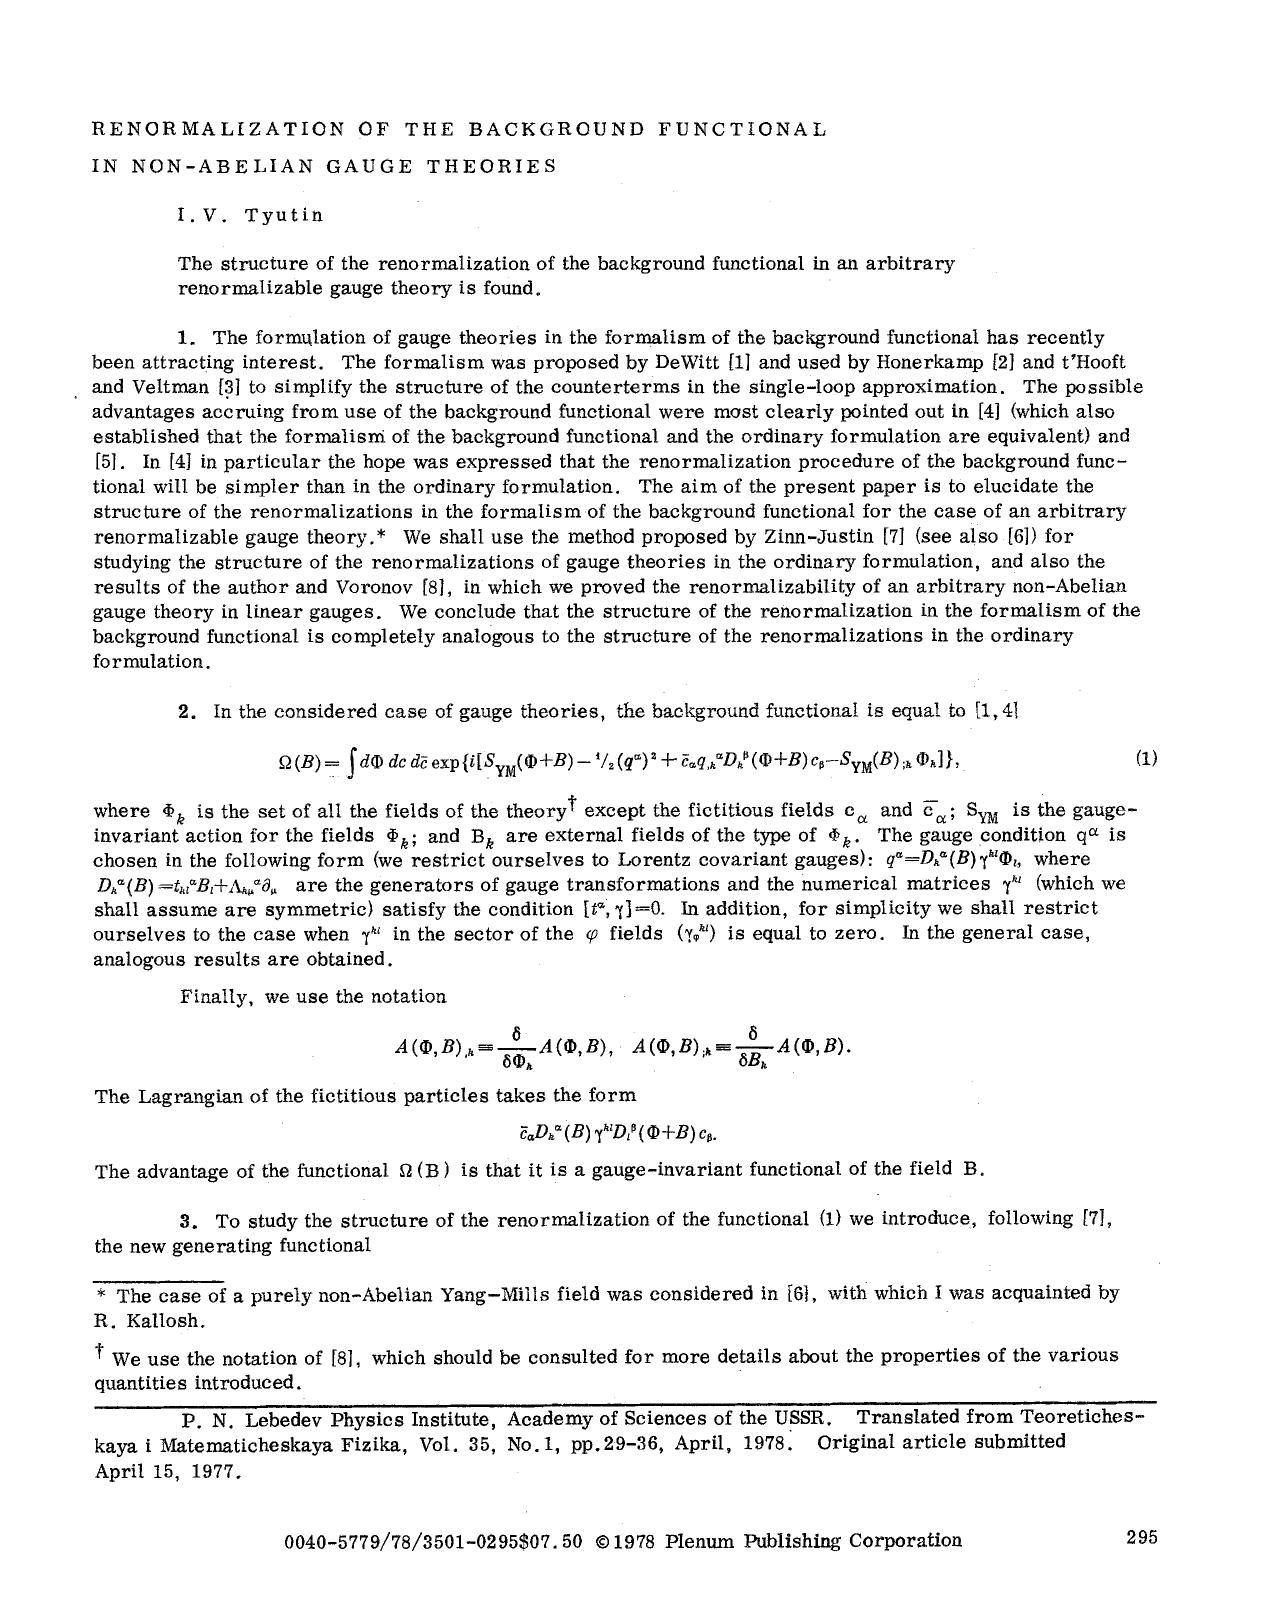 Renormalization of the background functional in non-Abelian gauge theories by Unknown